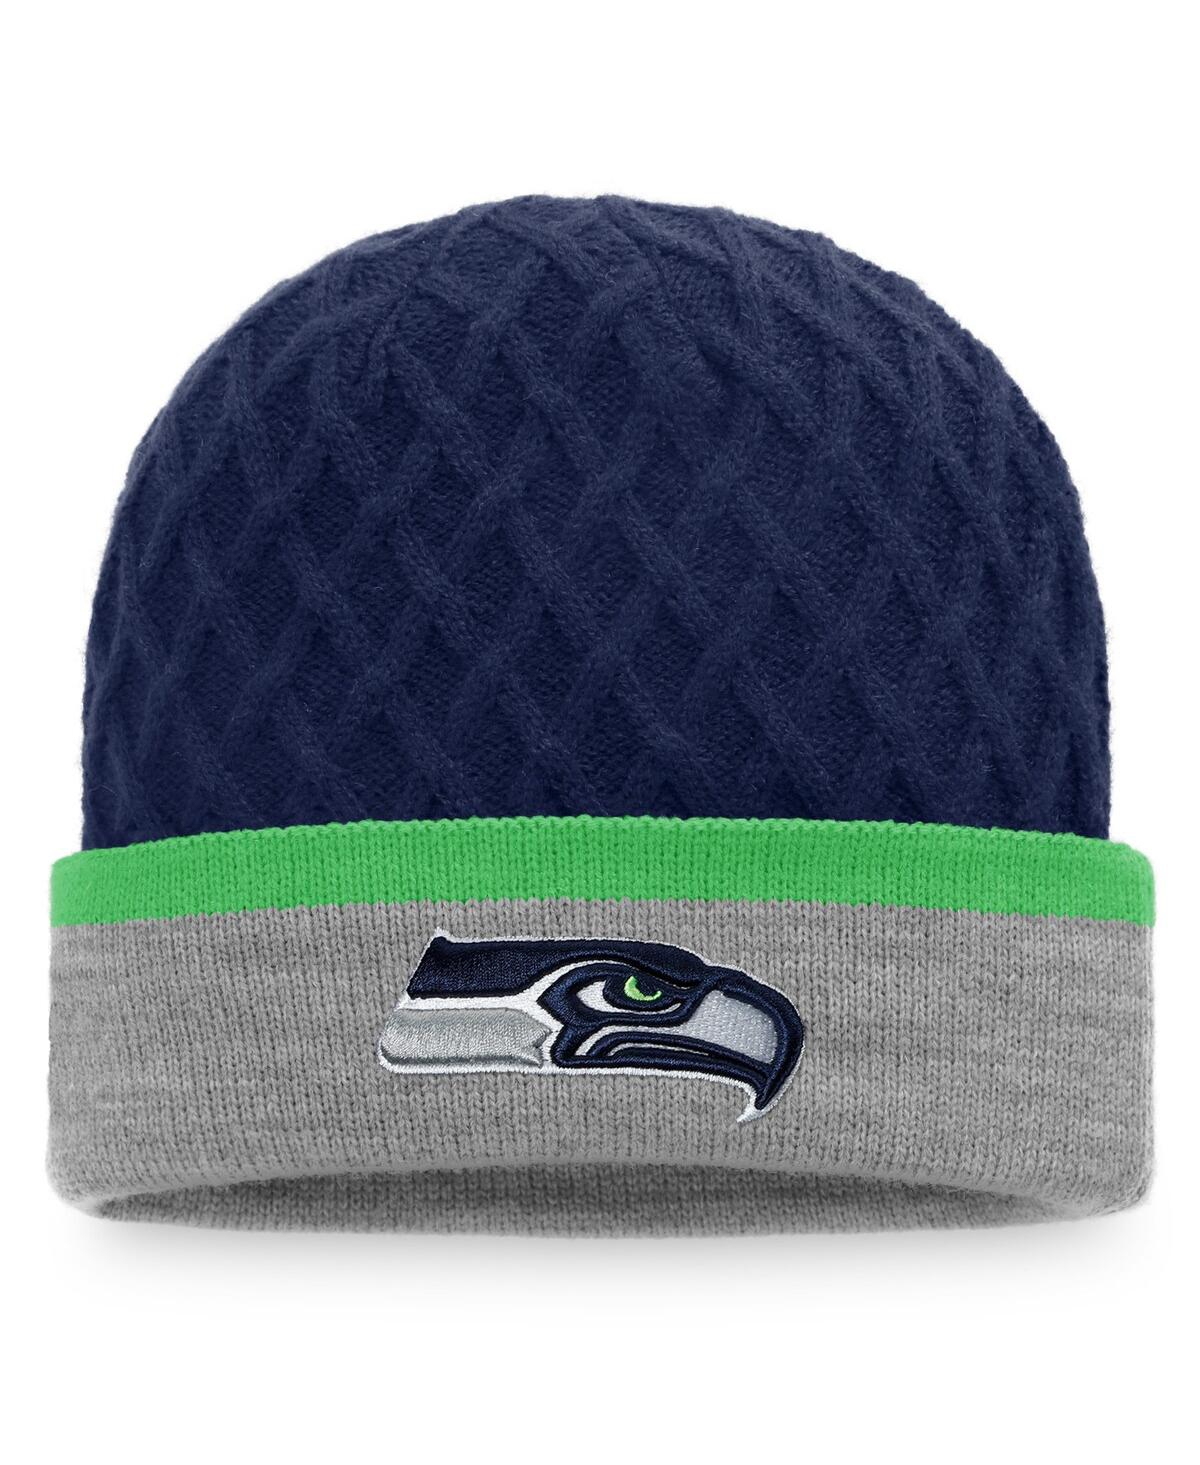 Fanatics Men's College Navy And Heathered Gray Seattle Seahawks Block Party Cuffed Knit Hat In College Navy,heathered Gray